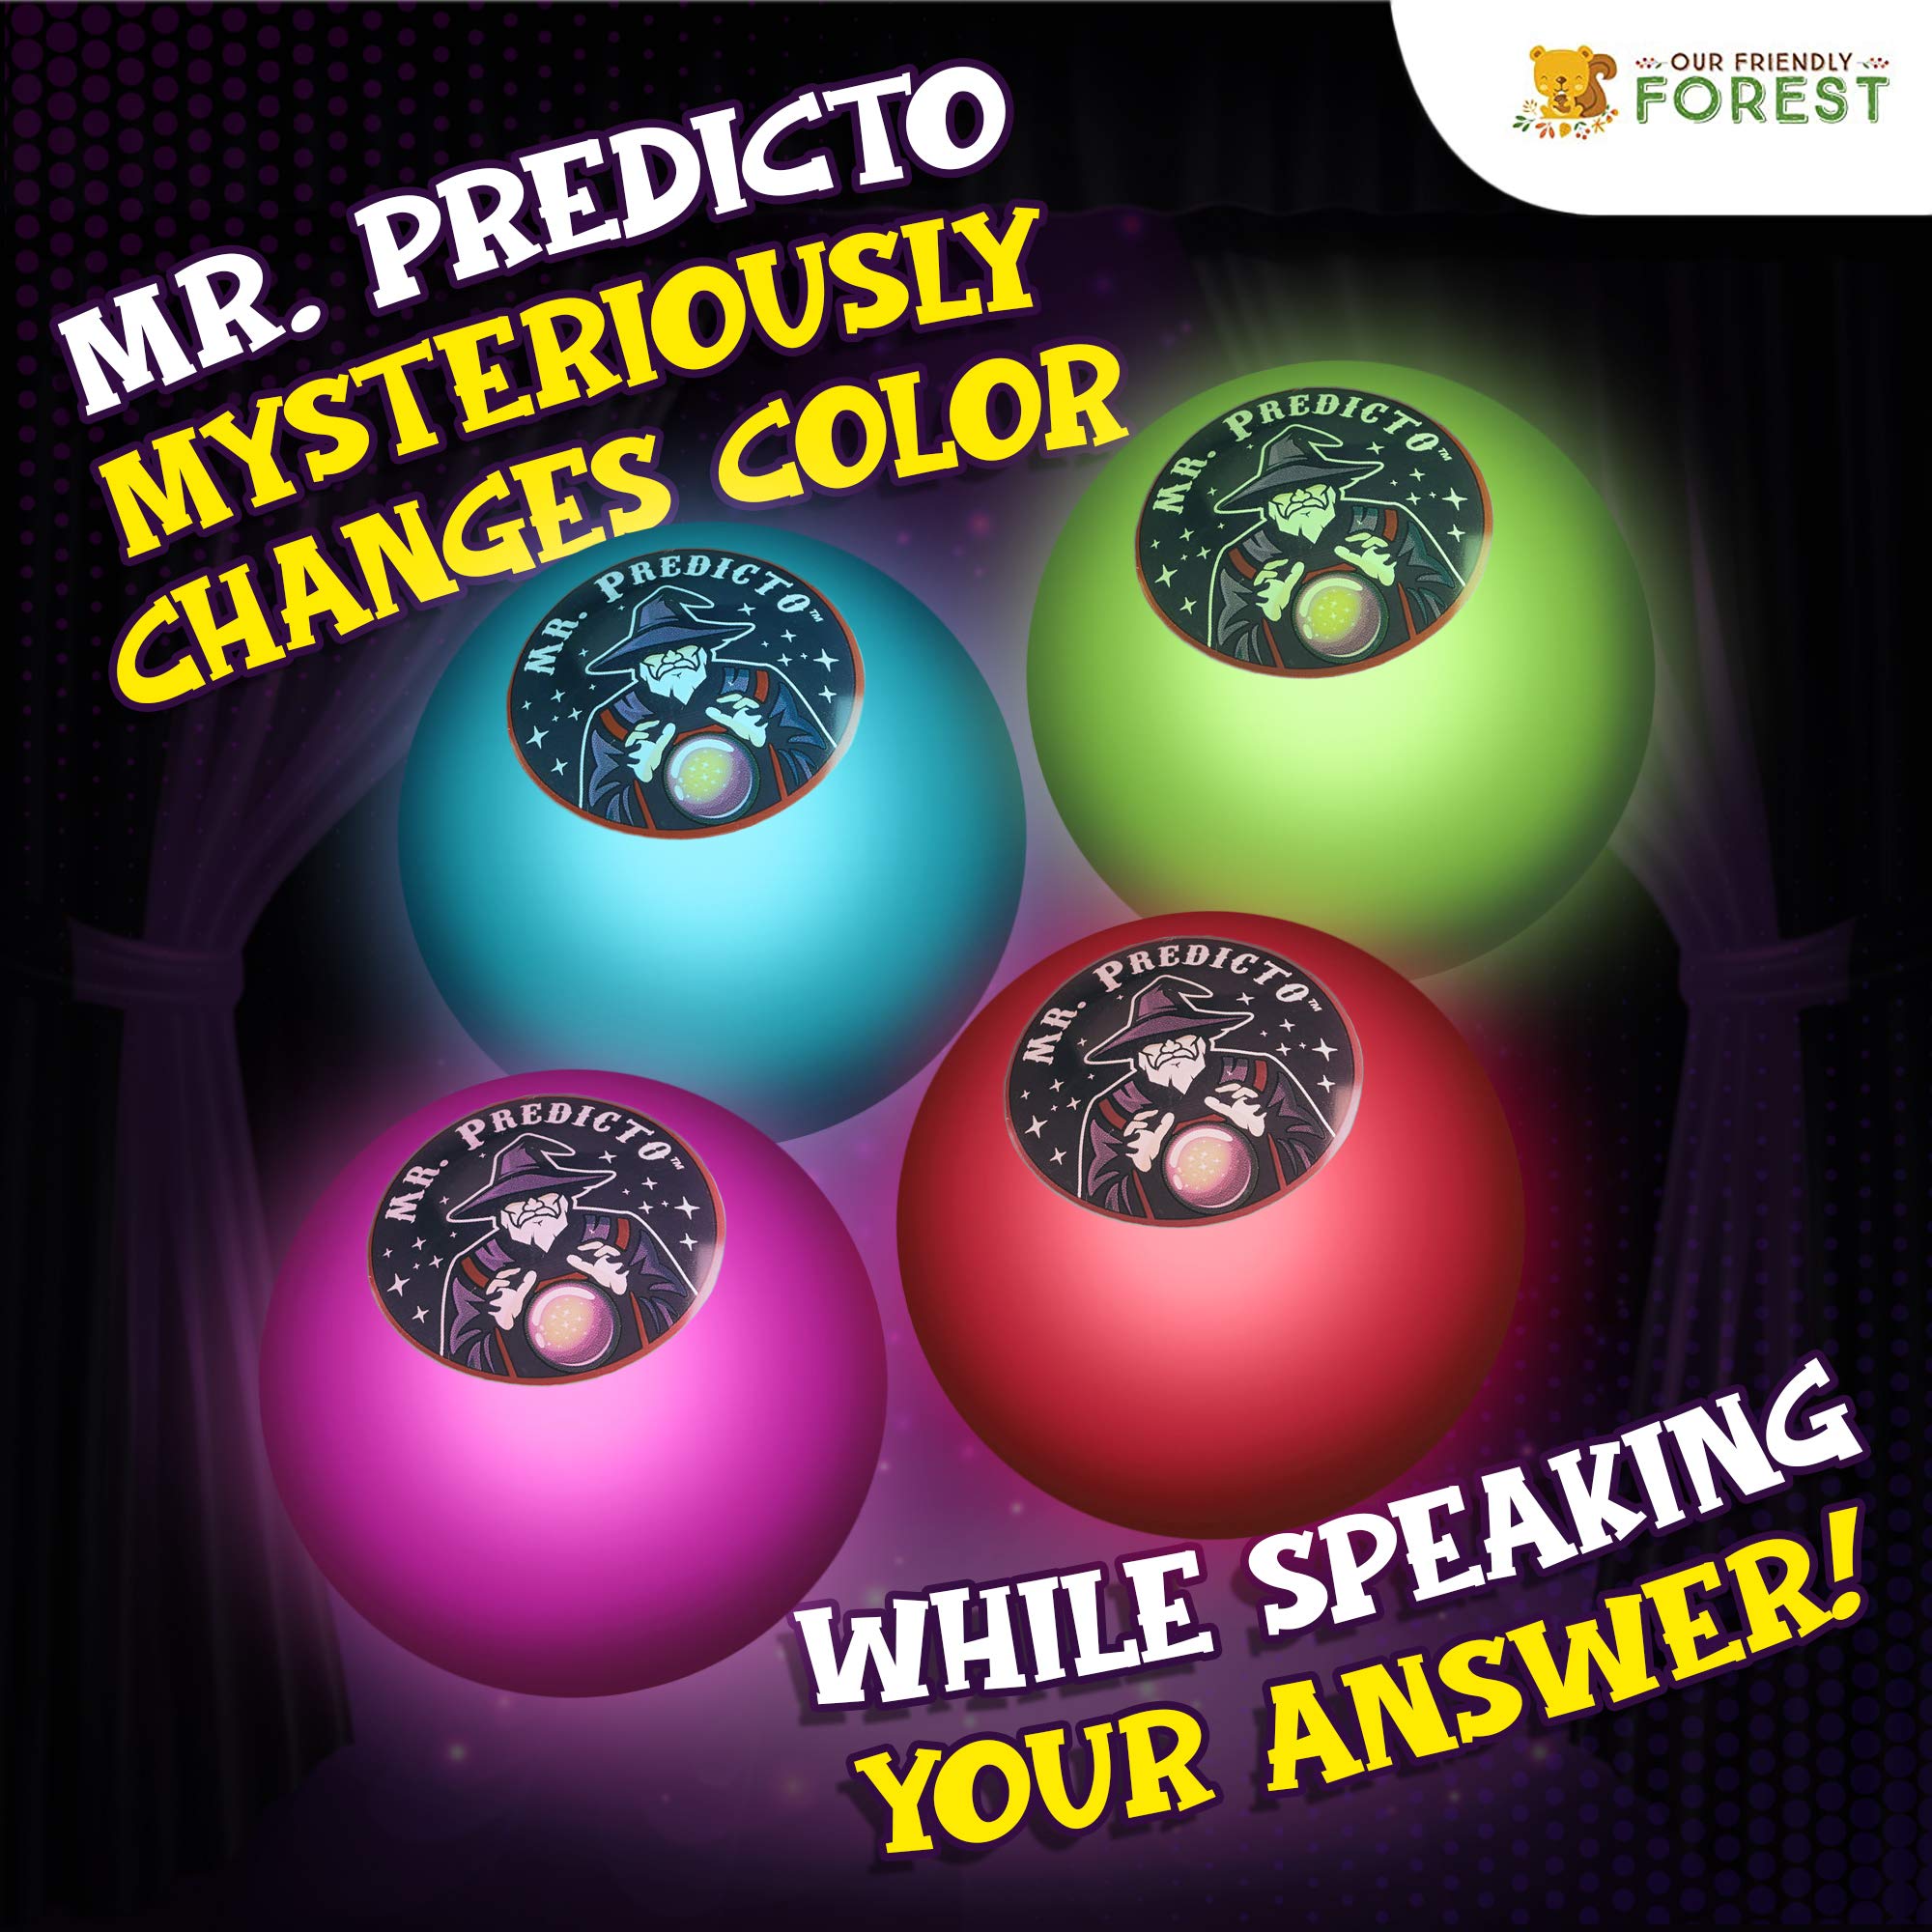 Mr. Predicto Fortune Teller Crystal Ball - Ask a Question & He Speaks an Answer - Mysterious Magic Ball, Cool Ball Magic, Funny Toys for Teens, Tweens - Kids Novelty Toys & Amusements - Light Up Toy